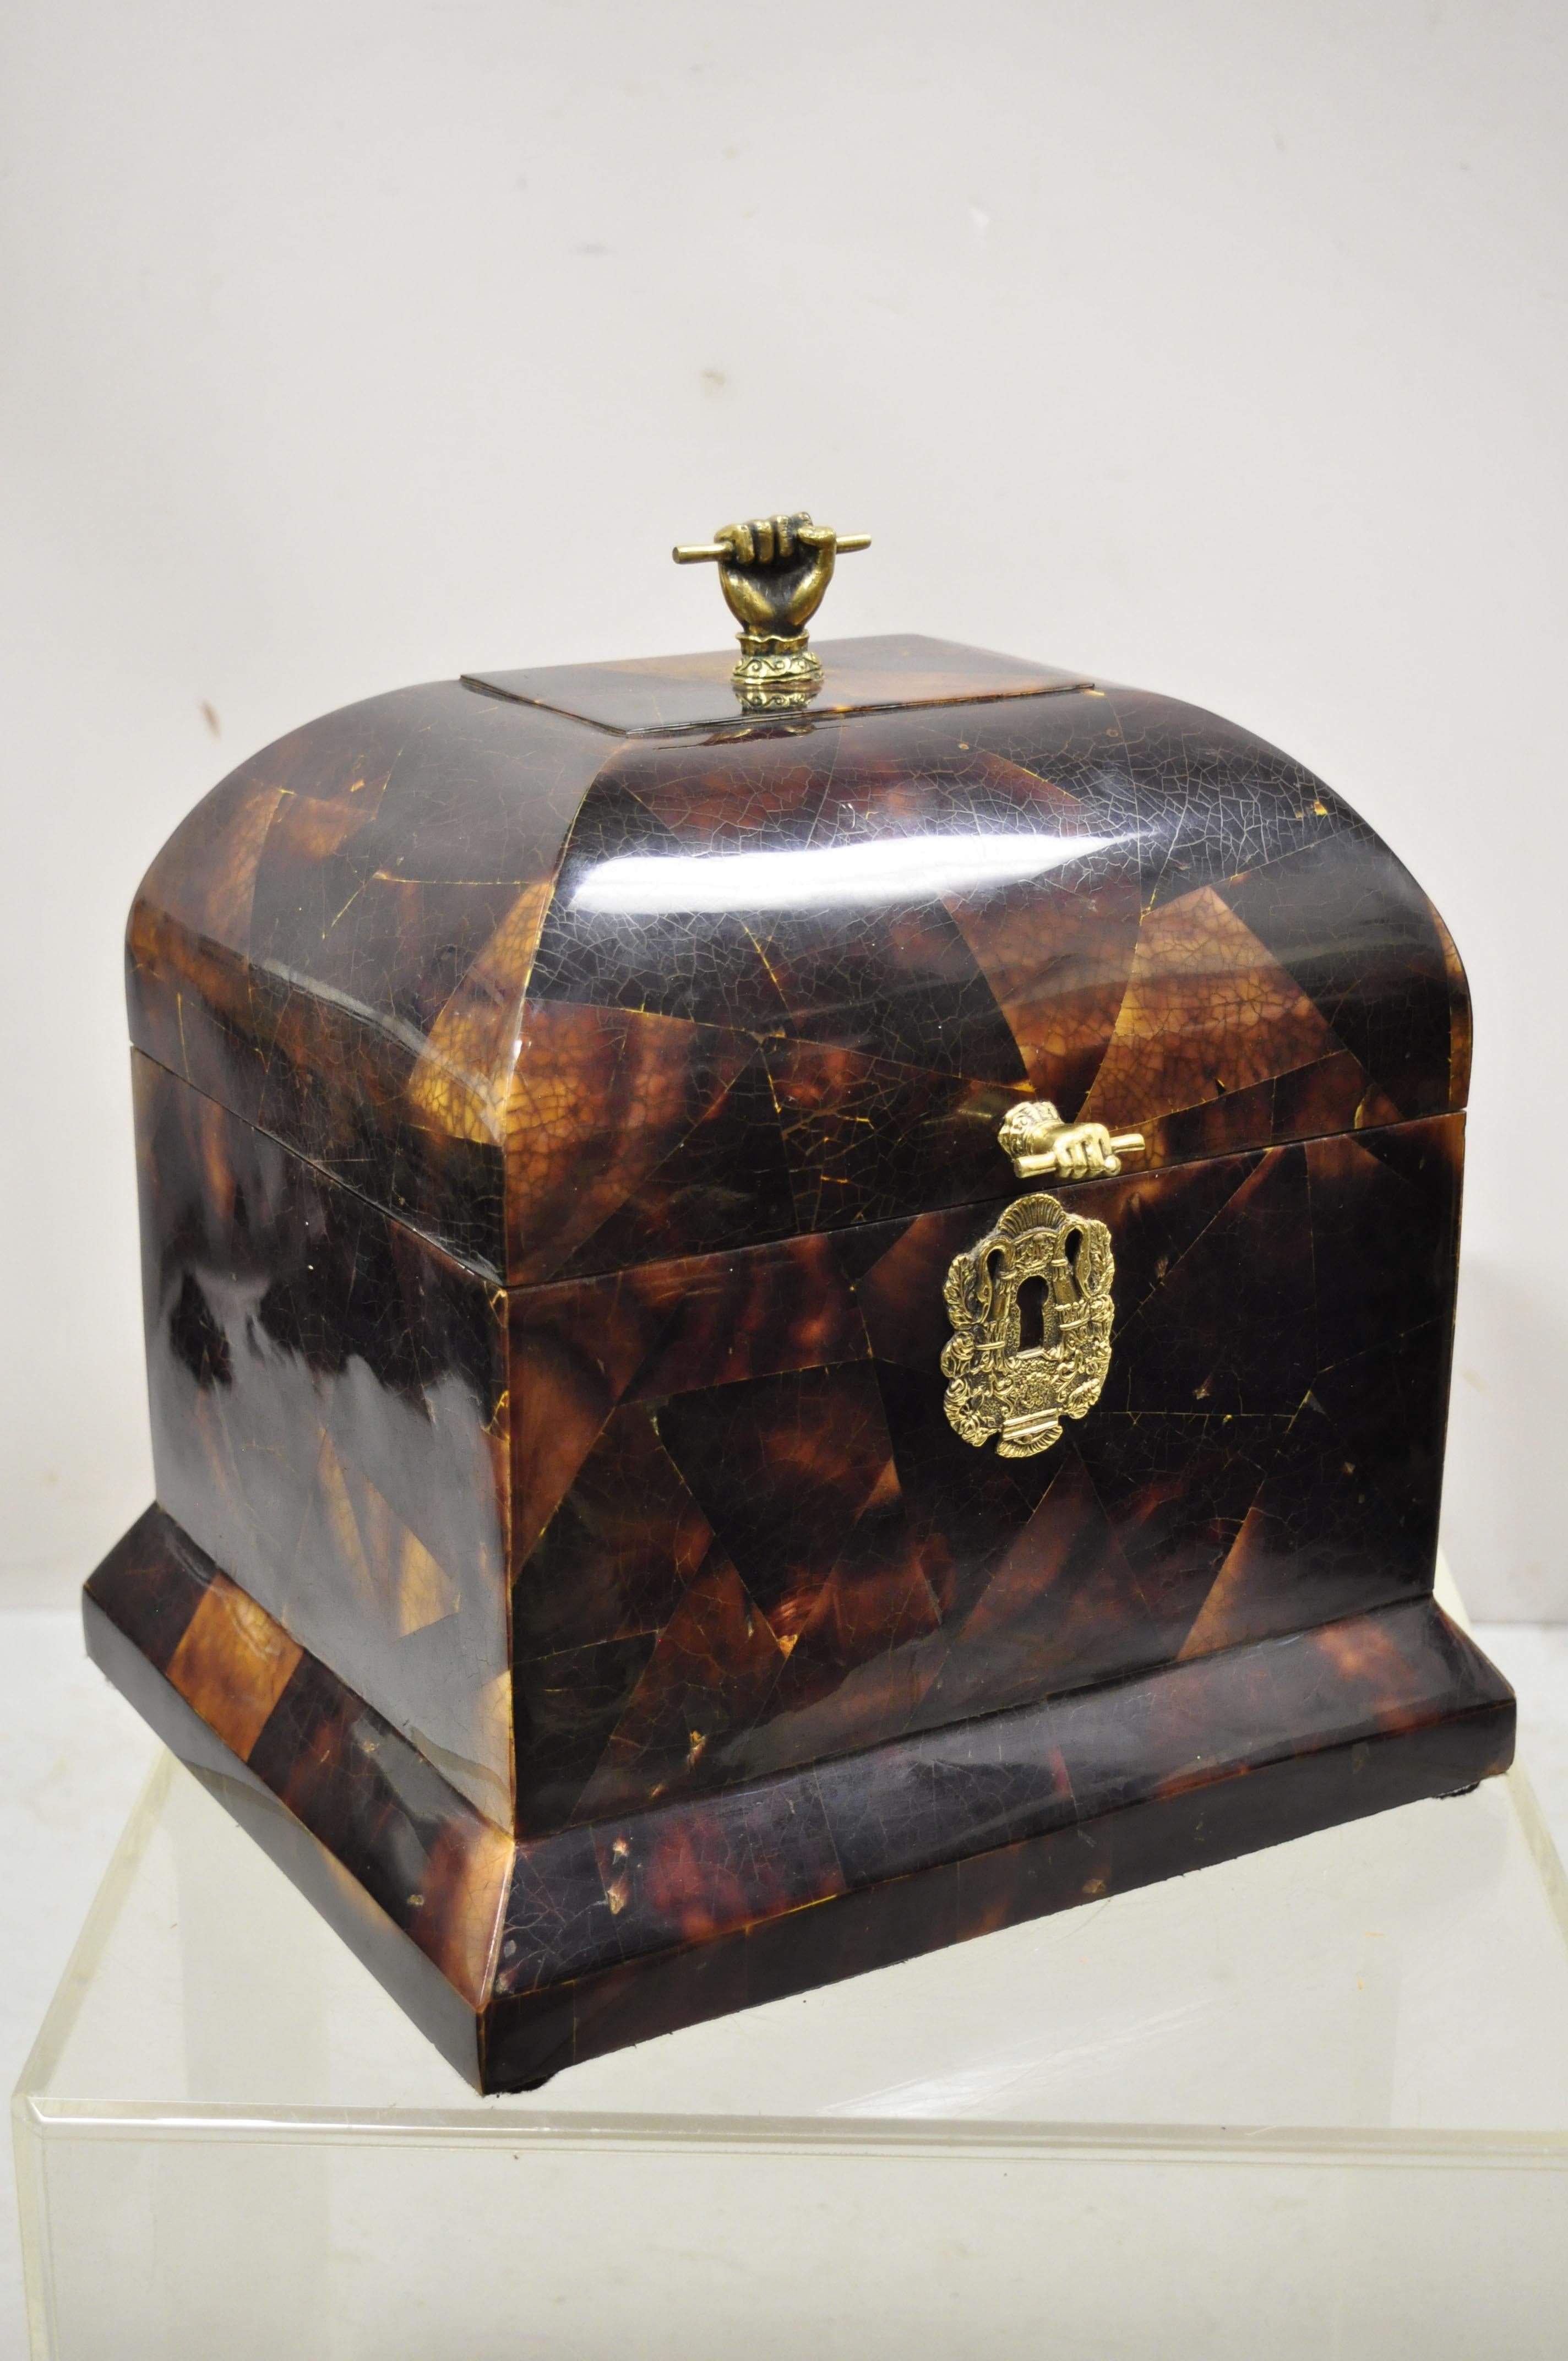 Faux tortoise shell brass hands hinge lid box after Maitland Smith. Item features brass hand figures, faux tortoise shell case, hinge lid, very nice vintage item, quality craftsmanship, great style and form. Maker unconfirmed. Possibly Maitland